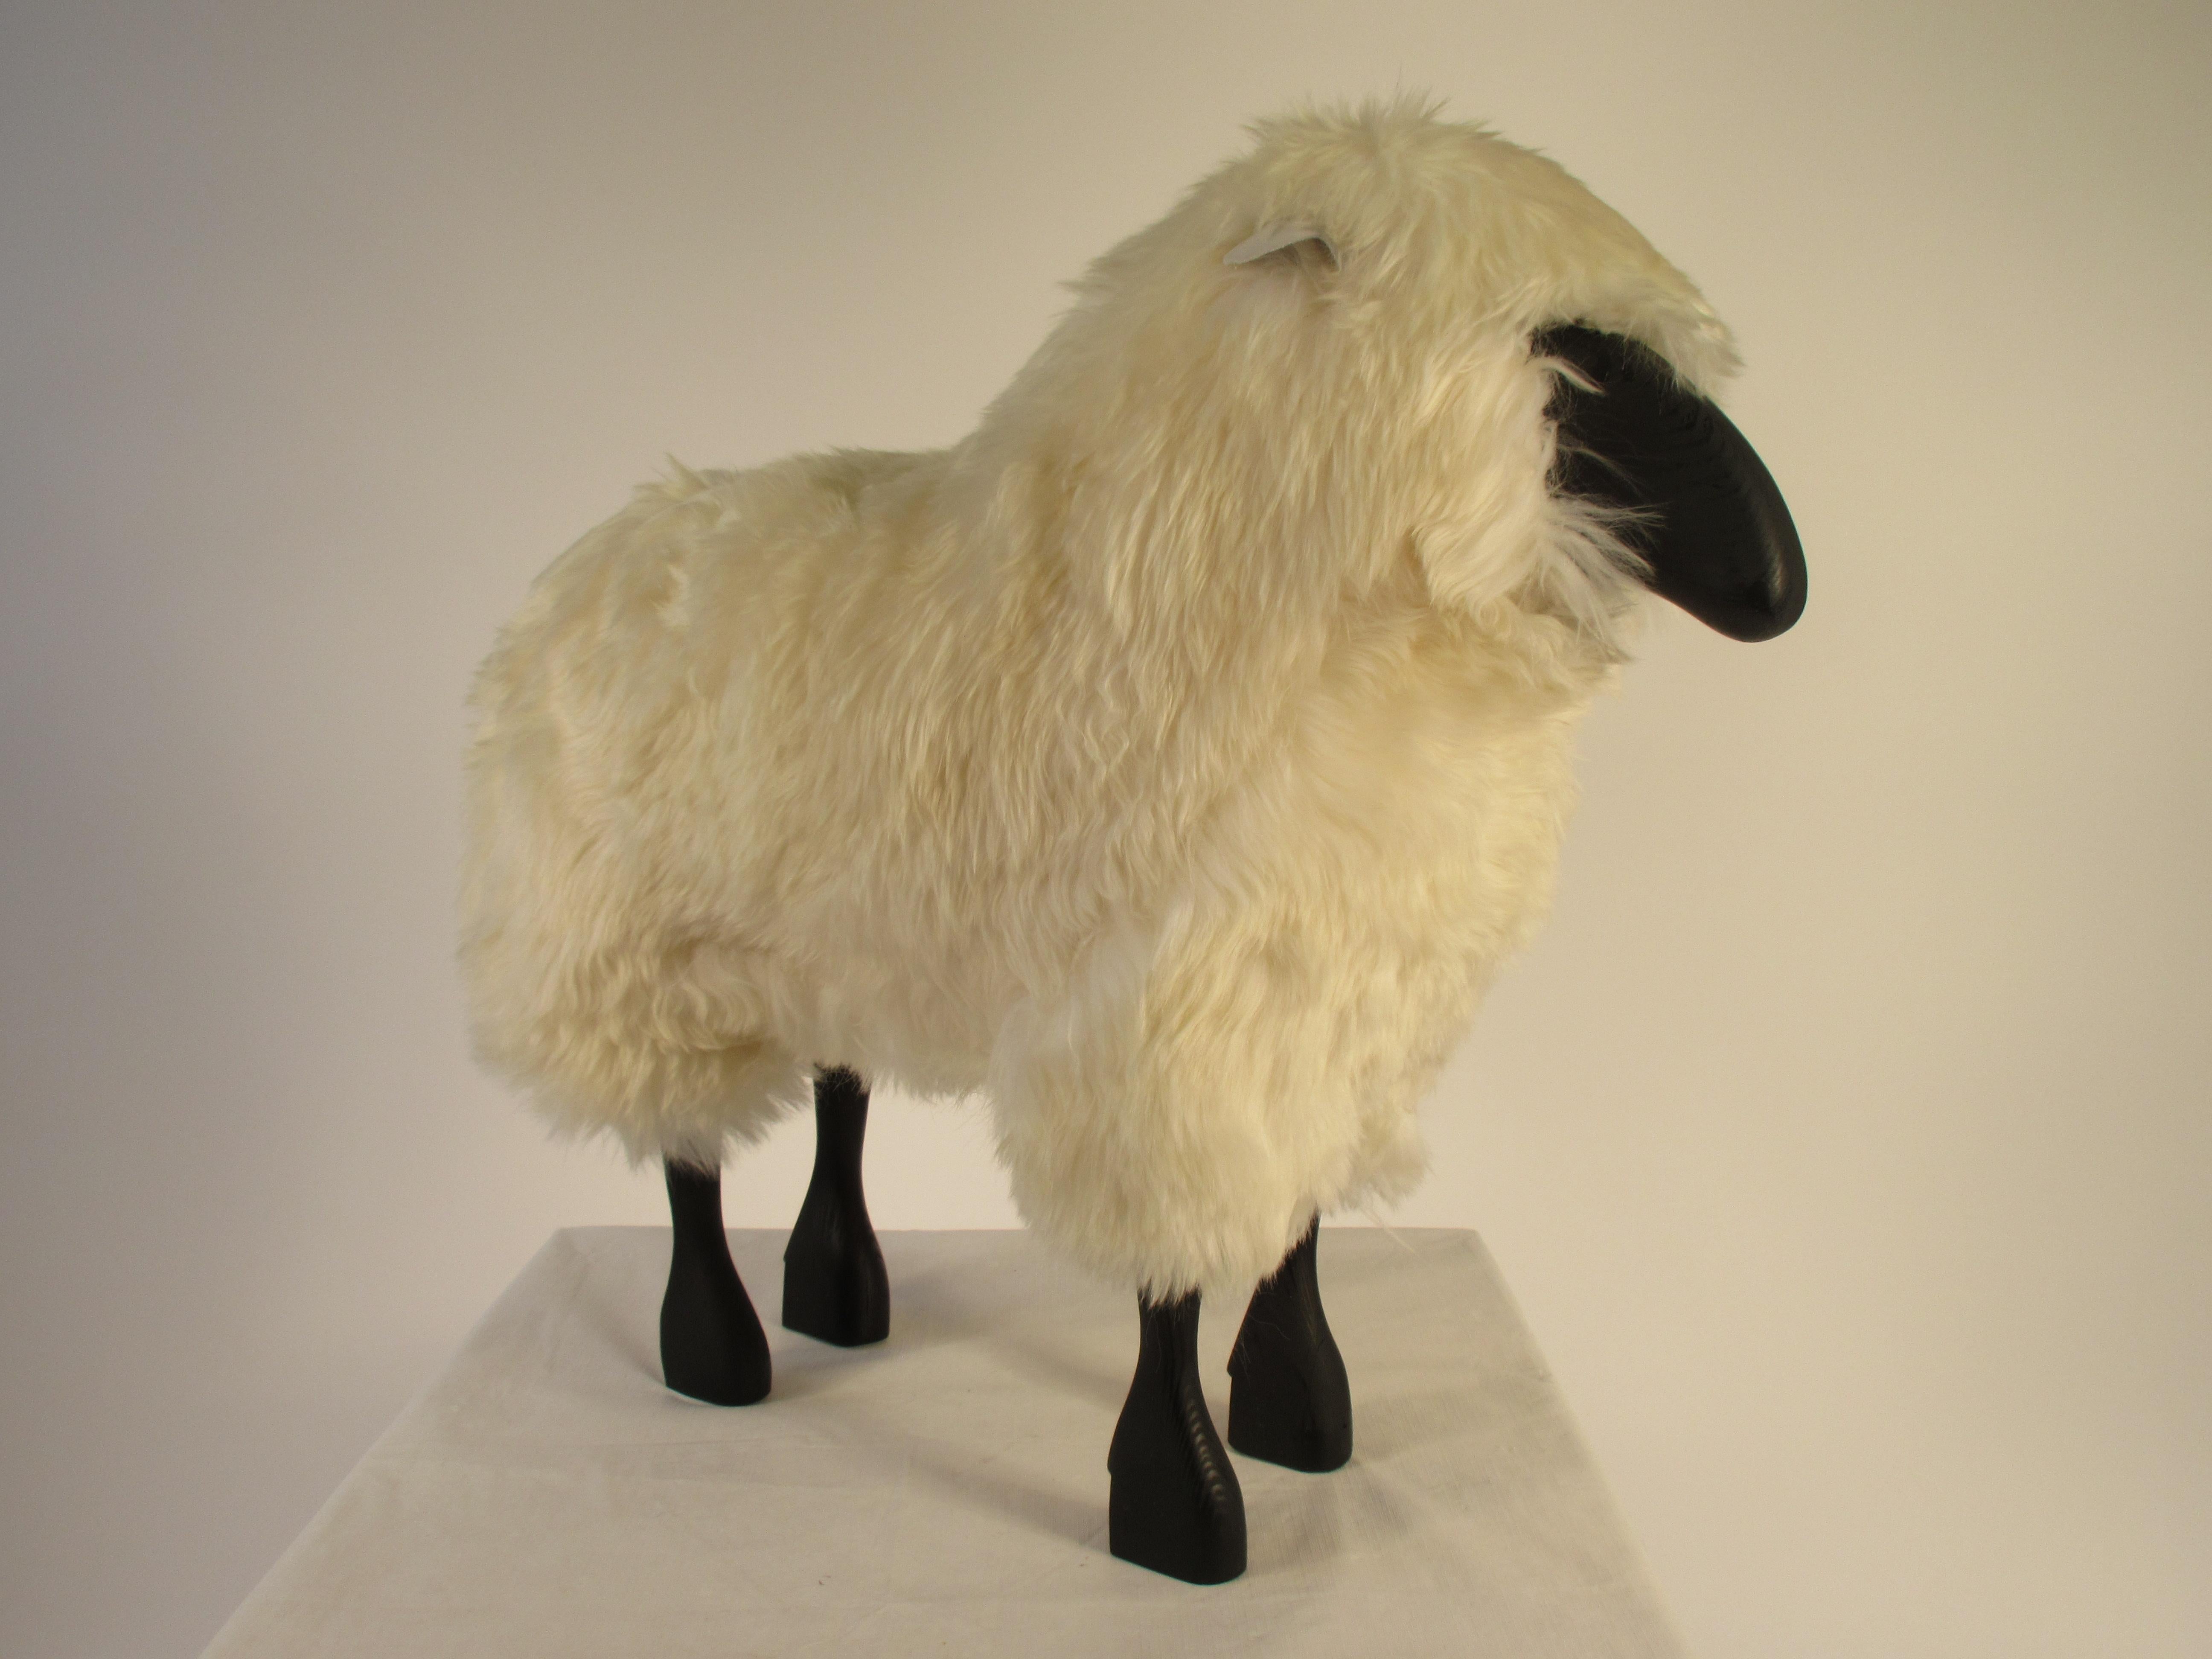 1965 life-size sheep sculpture. The size of a small sheep. Just reupholstered in genuine sheepskin.